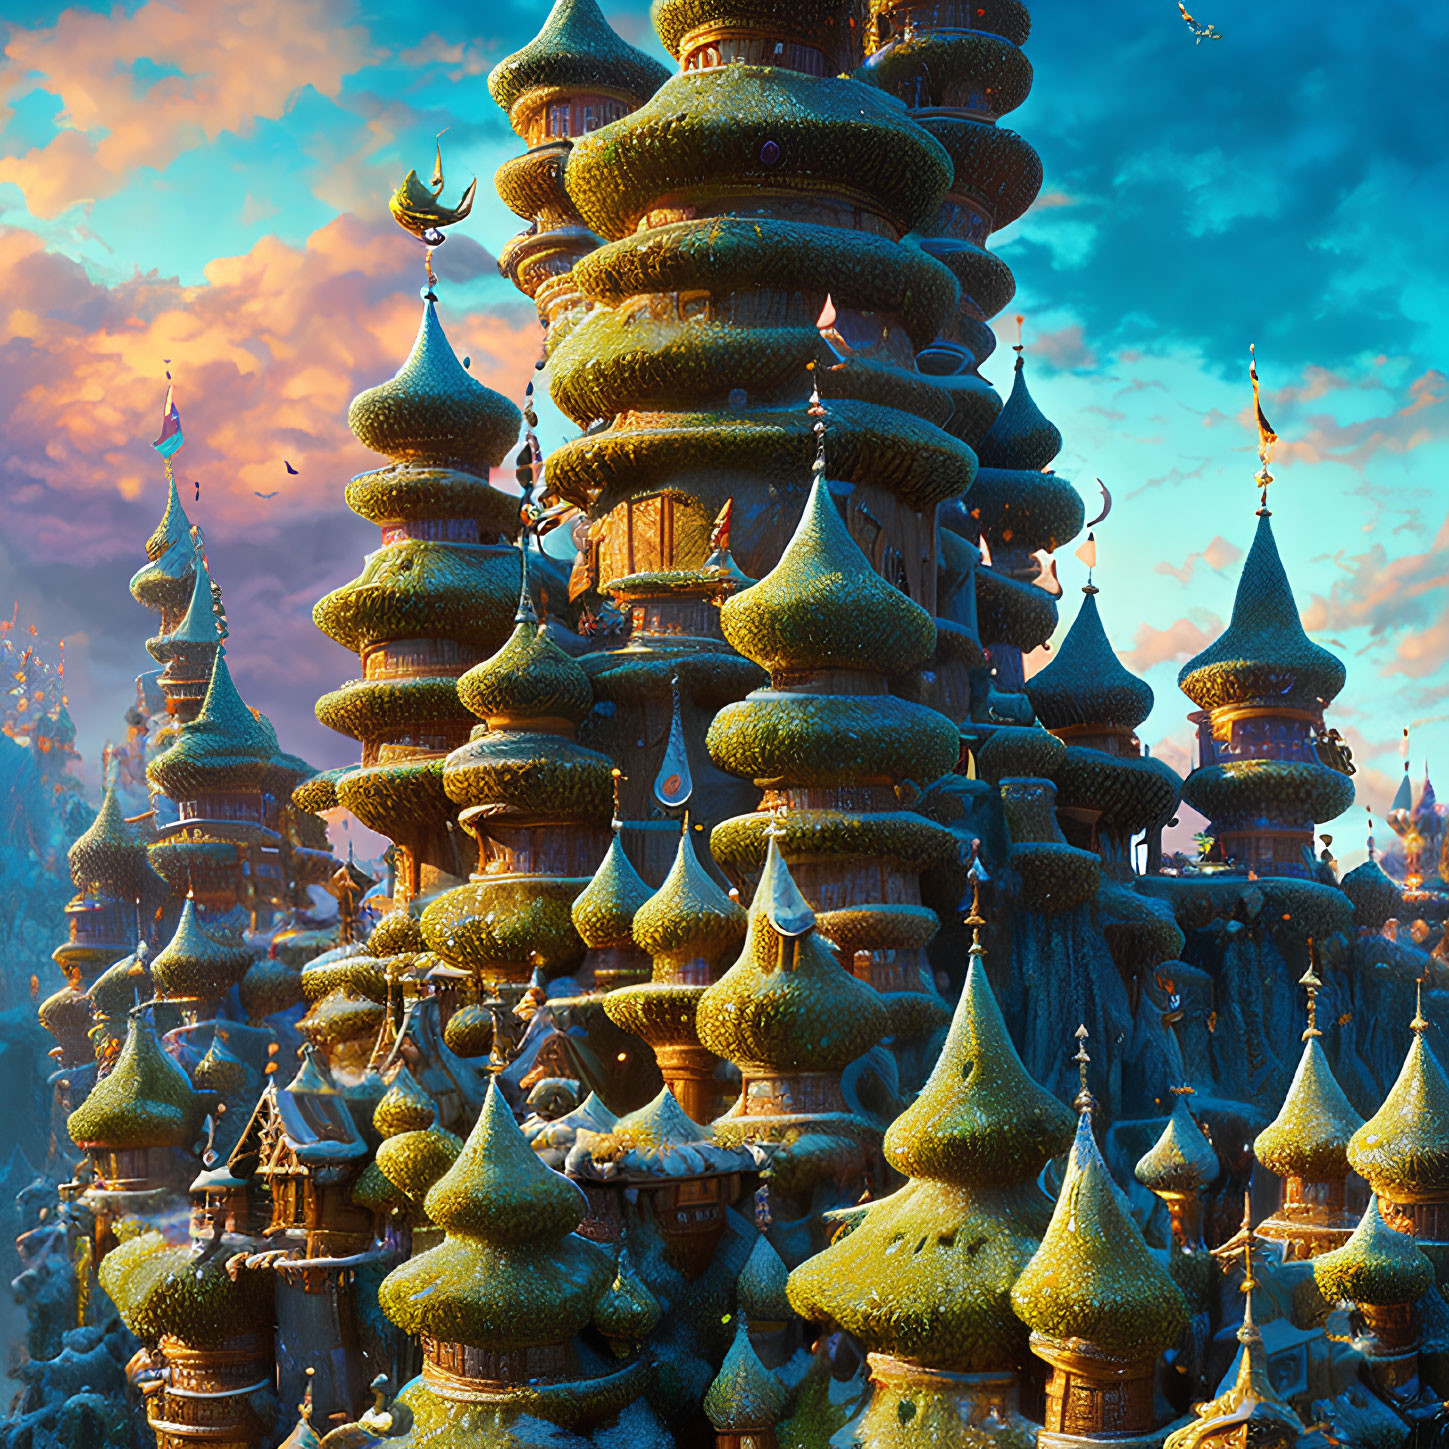 Intricate tower-like buildings in a fantastical cityscape at sunset